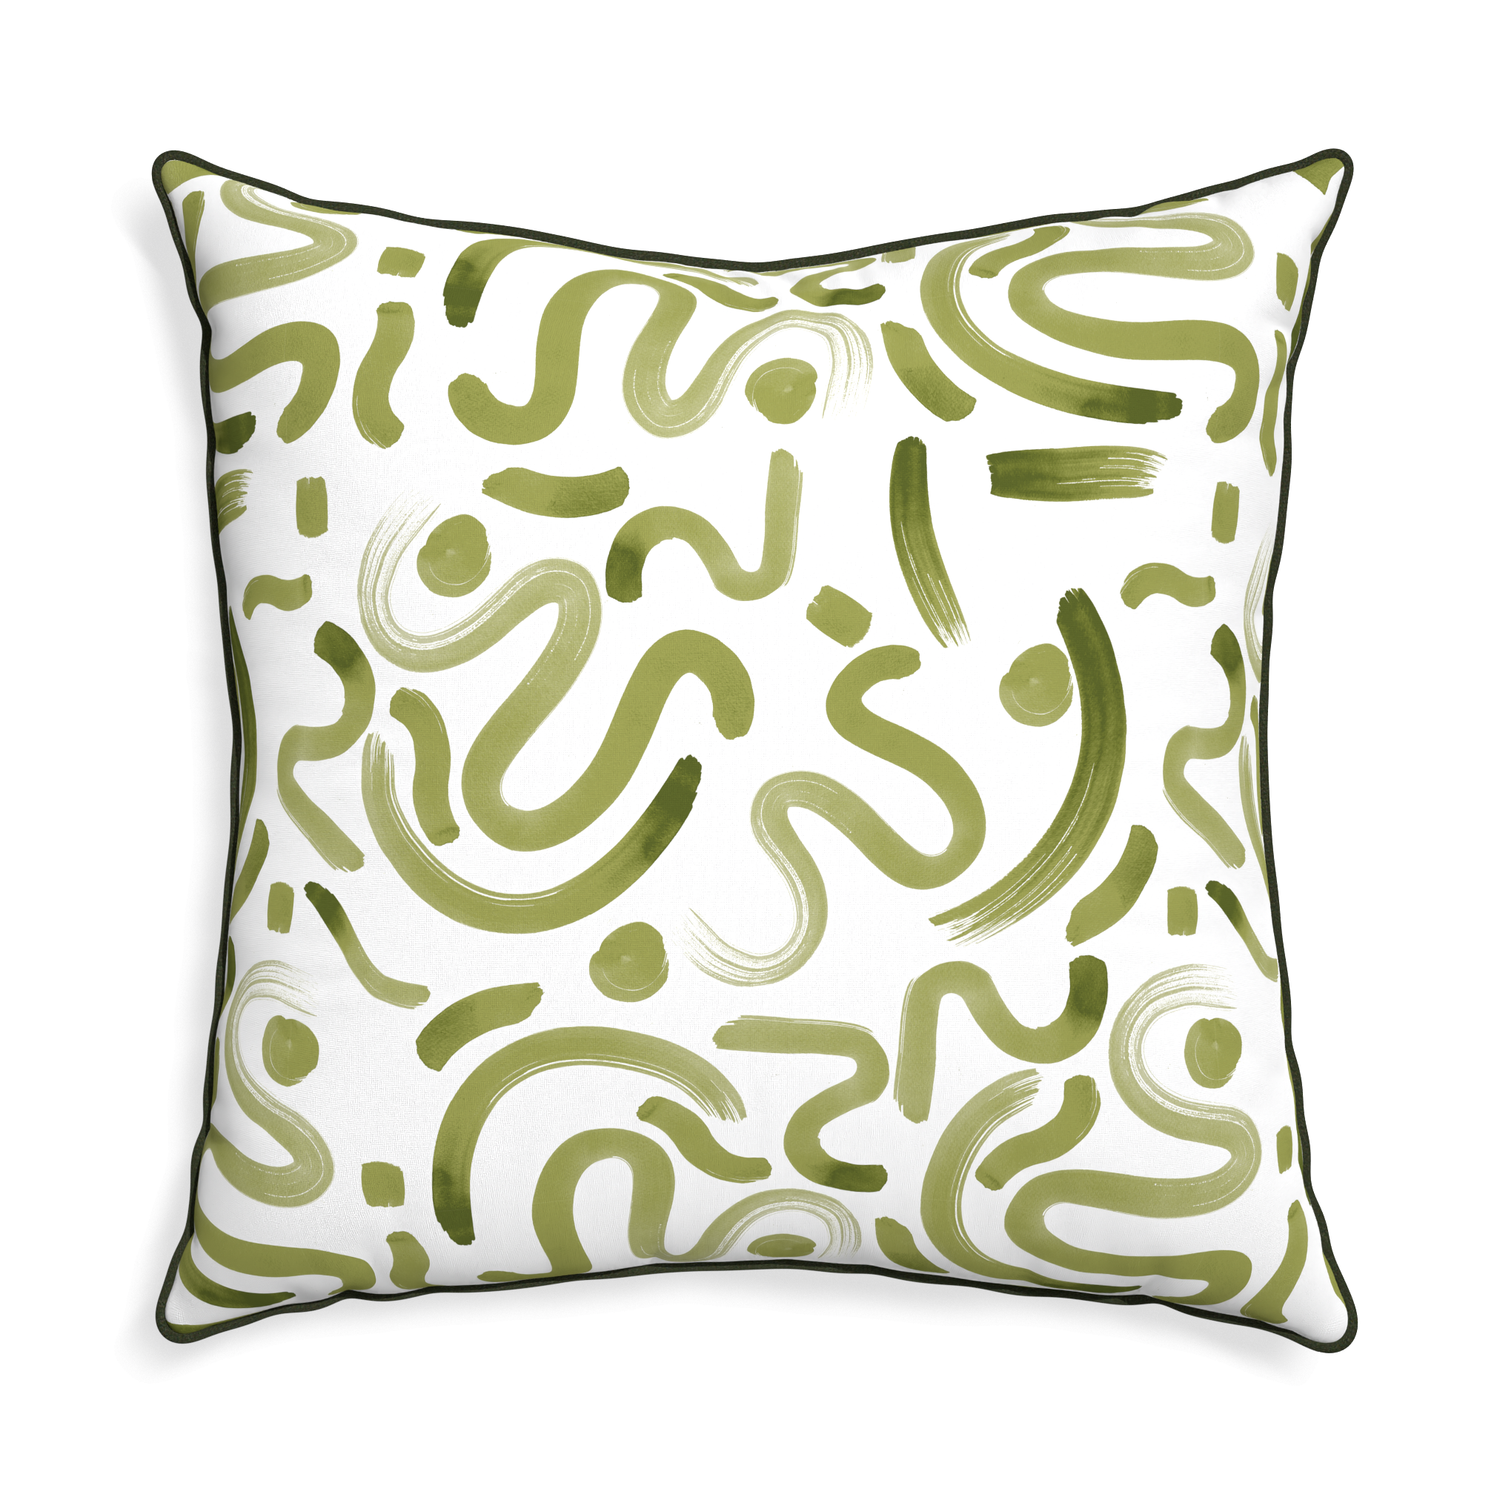 Euro-sham hockney moss custom moss greenpillow with f piping on white background